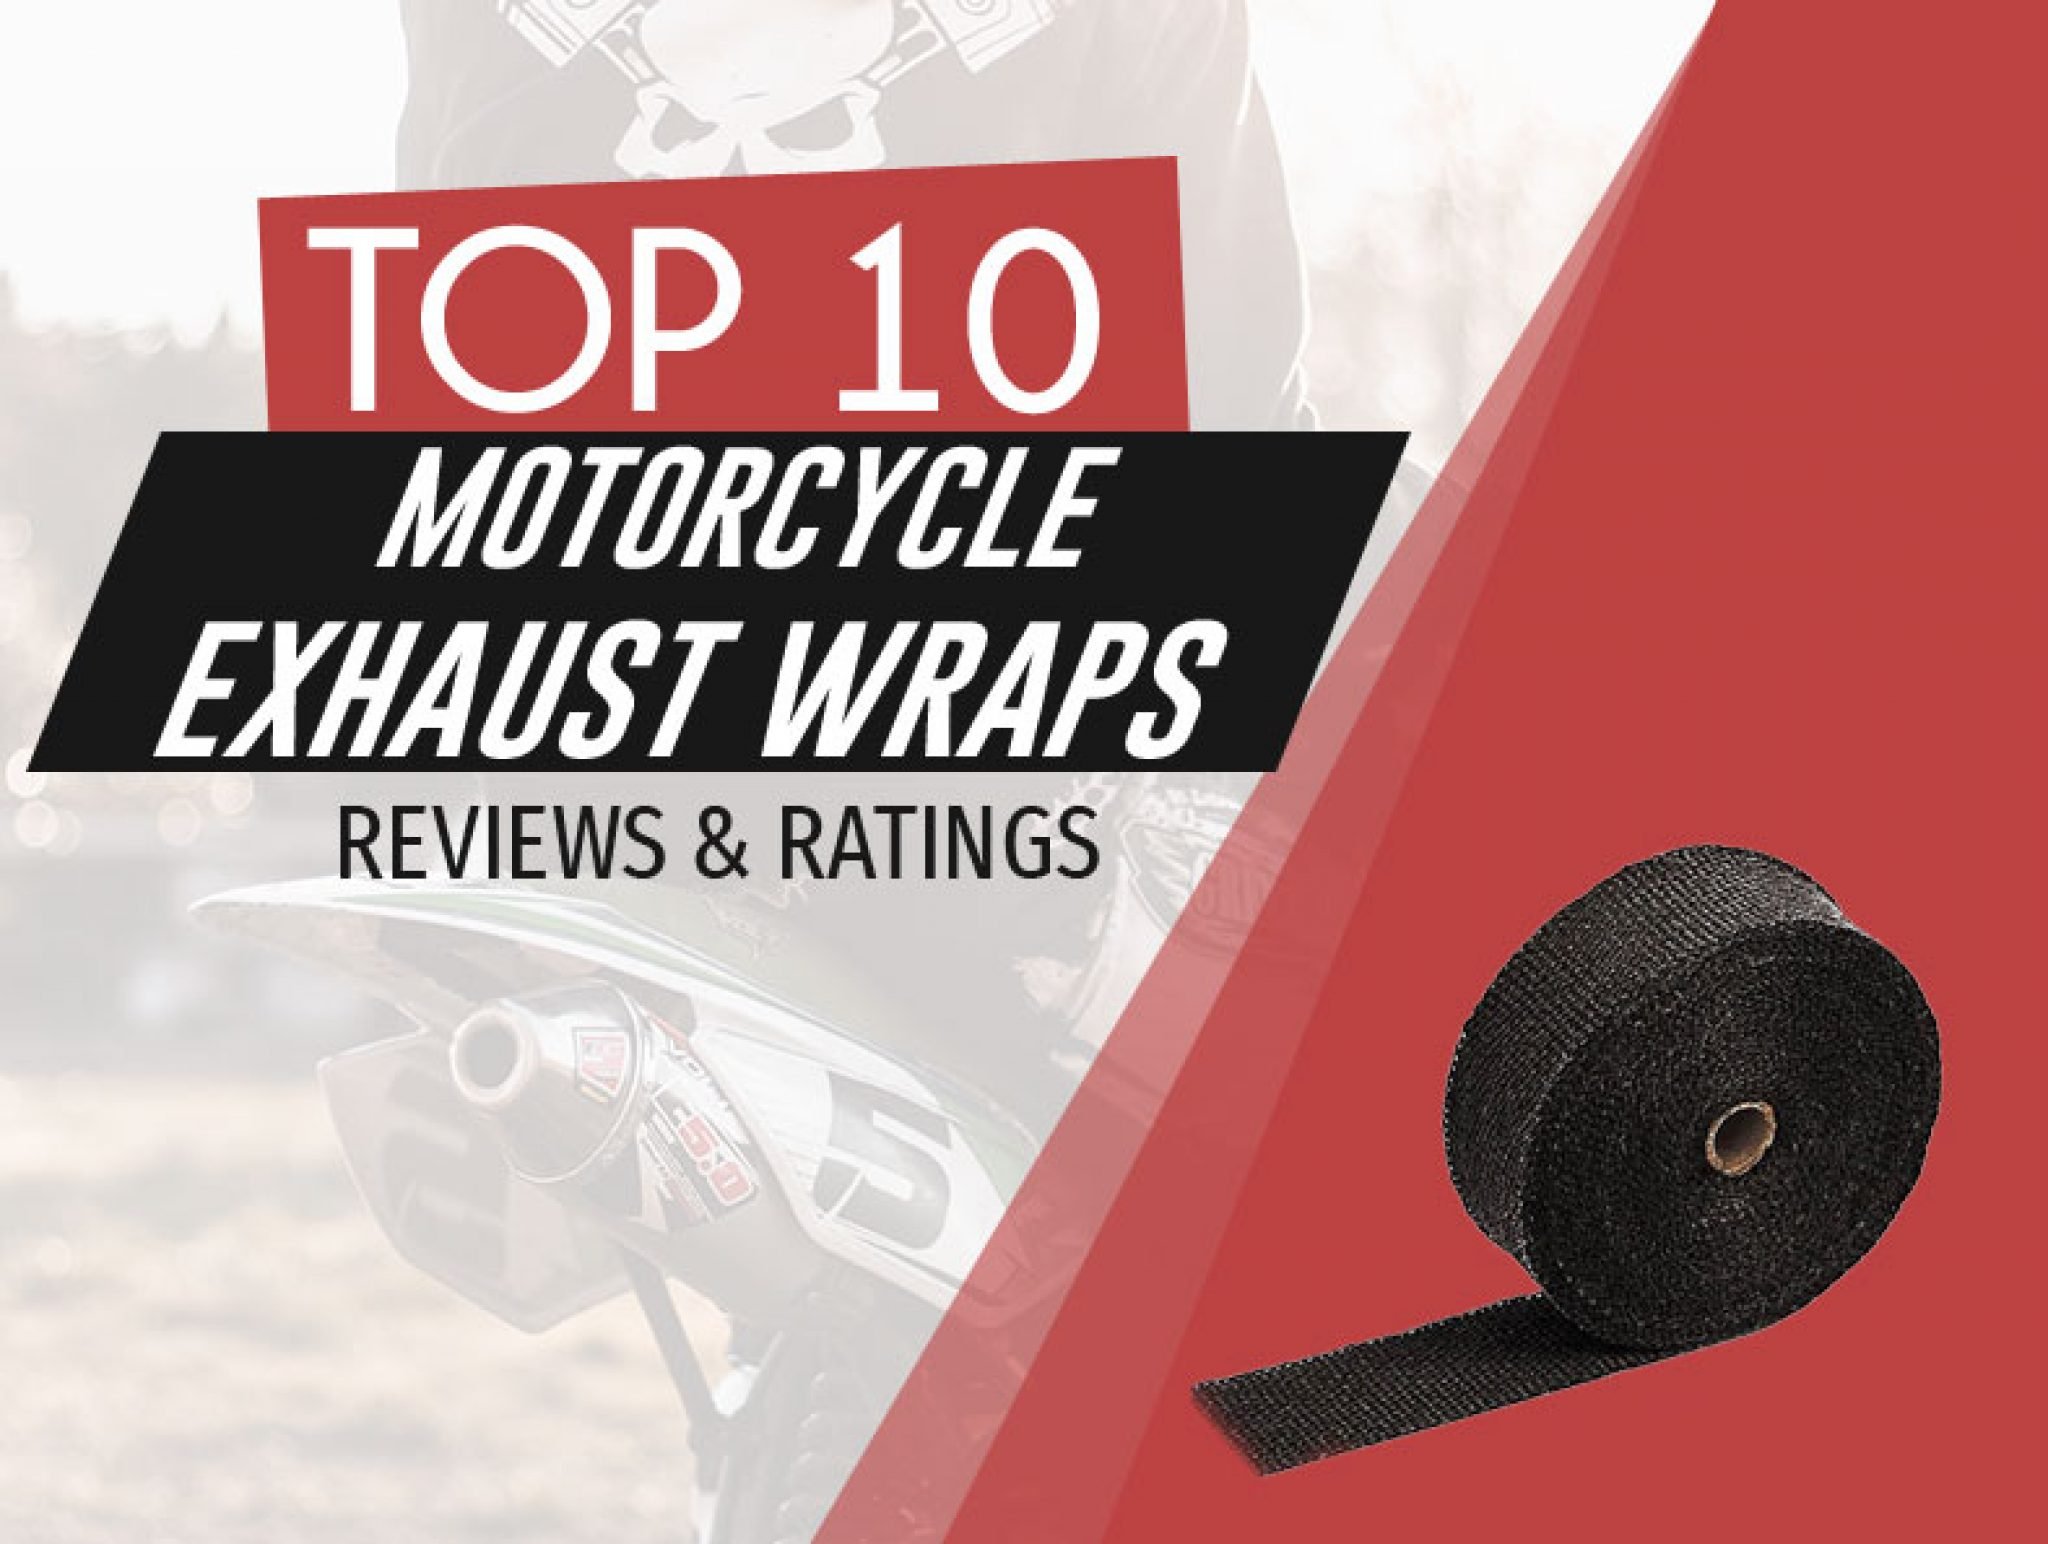 Best Motorcycle Exhaust Wrap - Reviewed for 2021!